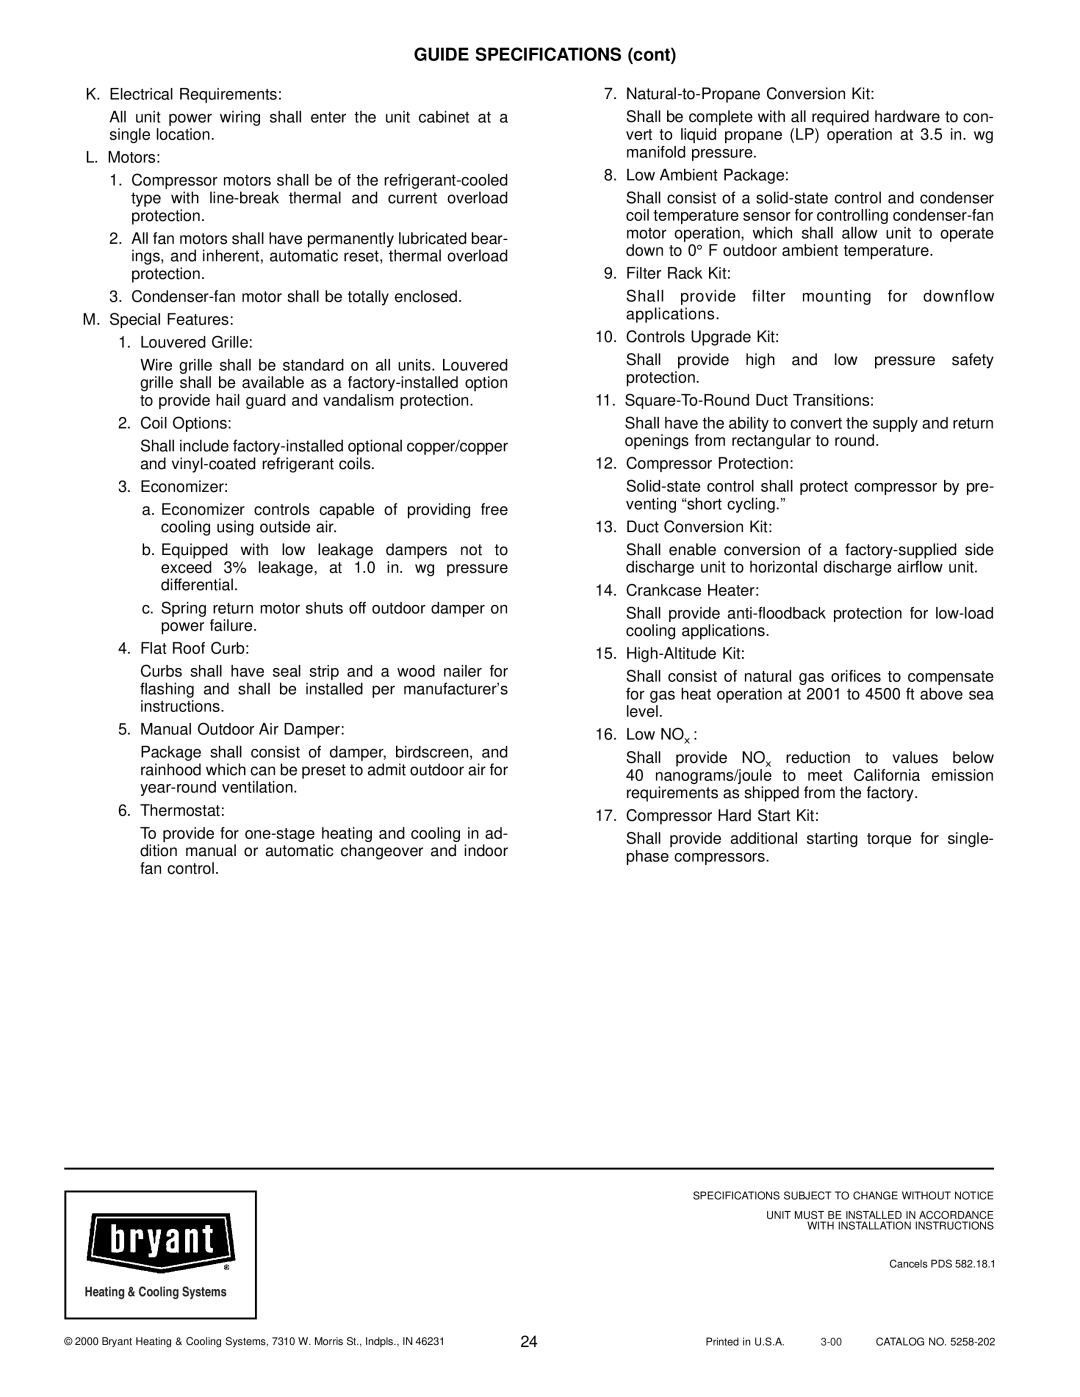 Bryant 582A manual GUIDE SPECIFICATIONS cont 